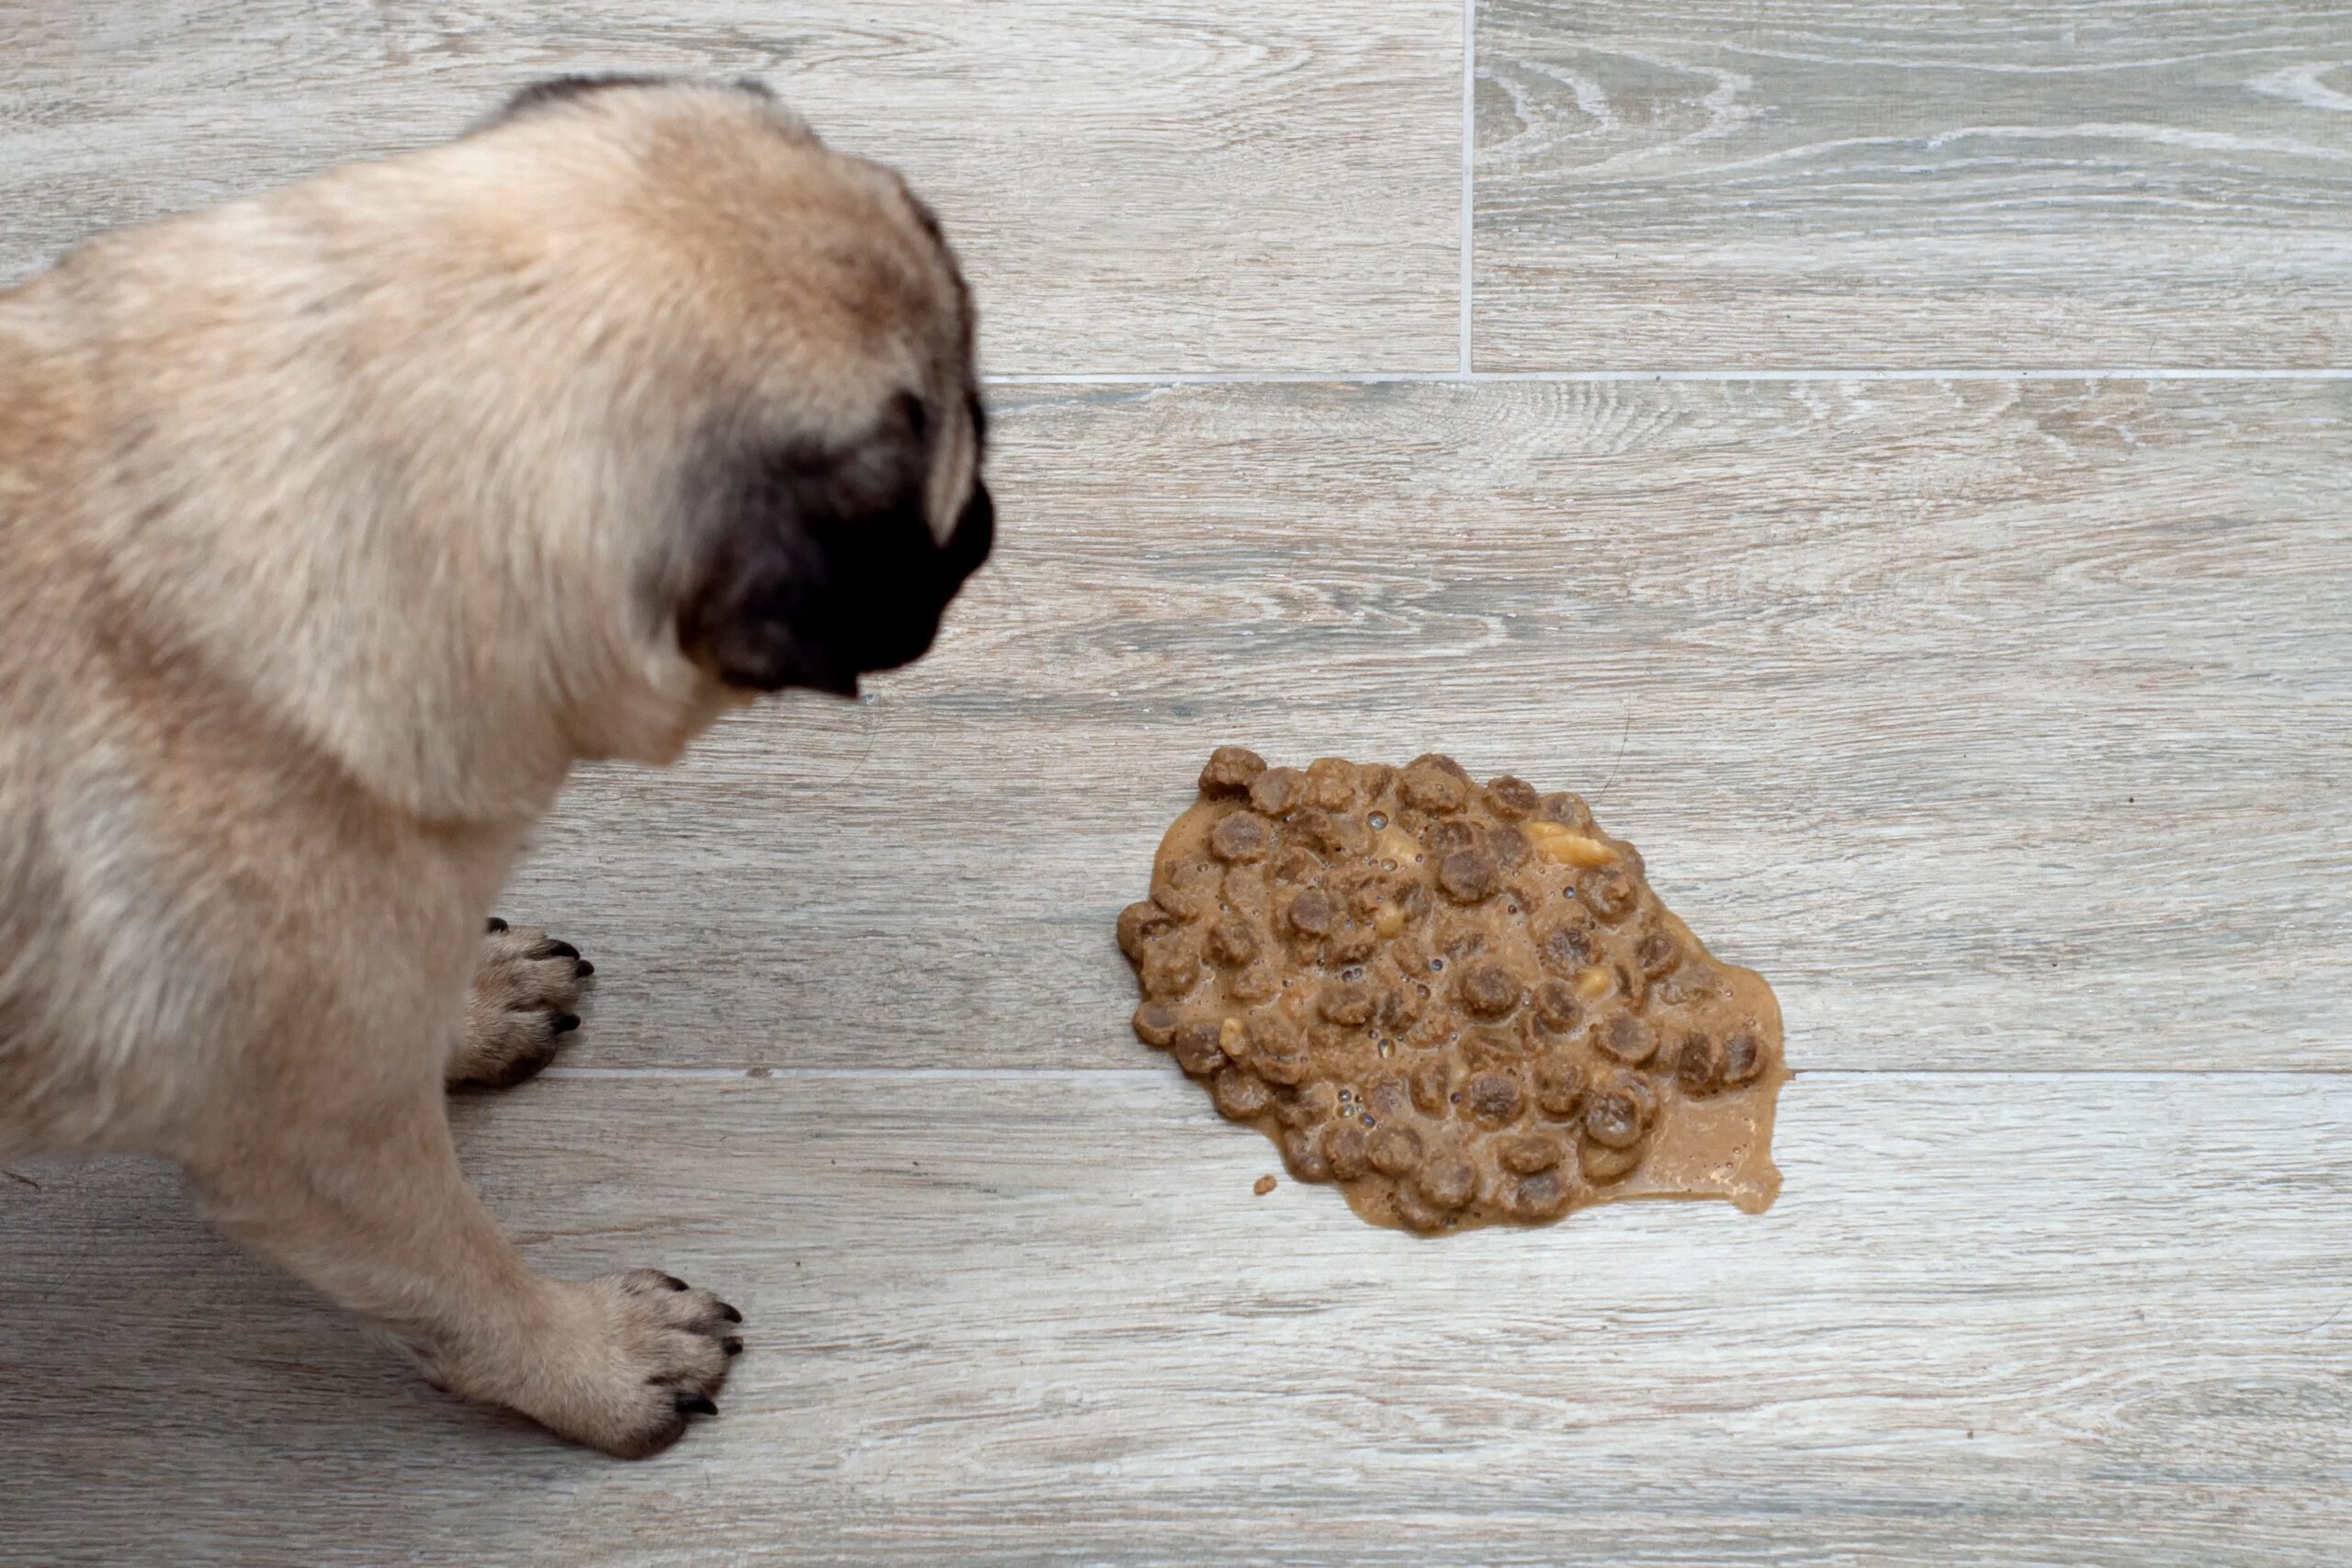 Dog Throwing Up Undigested Food: Causes, Symptoms, and Treatment